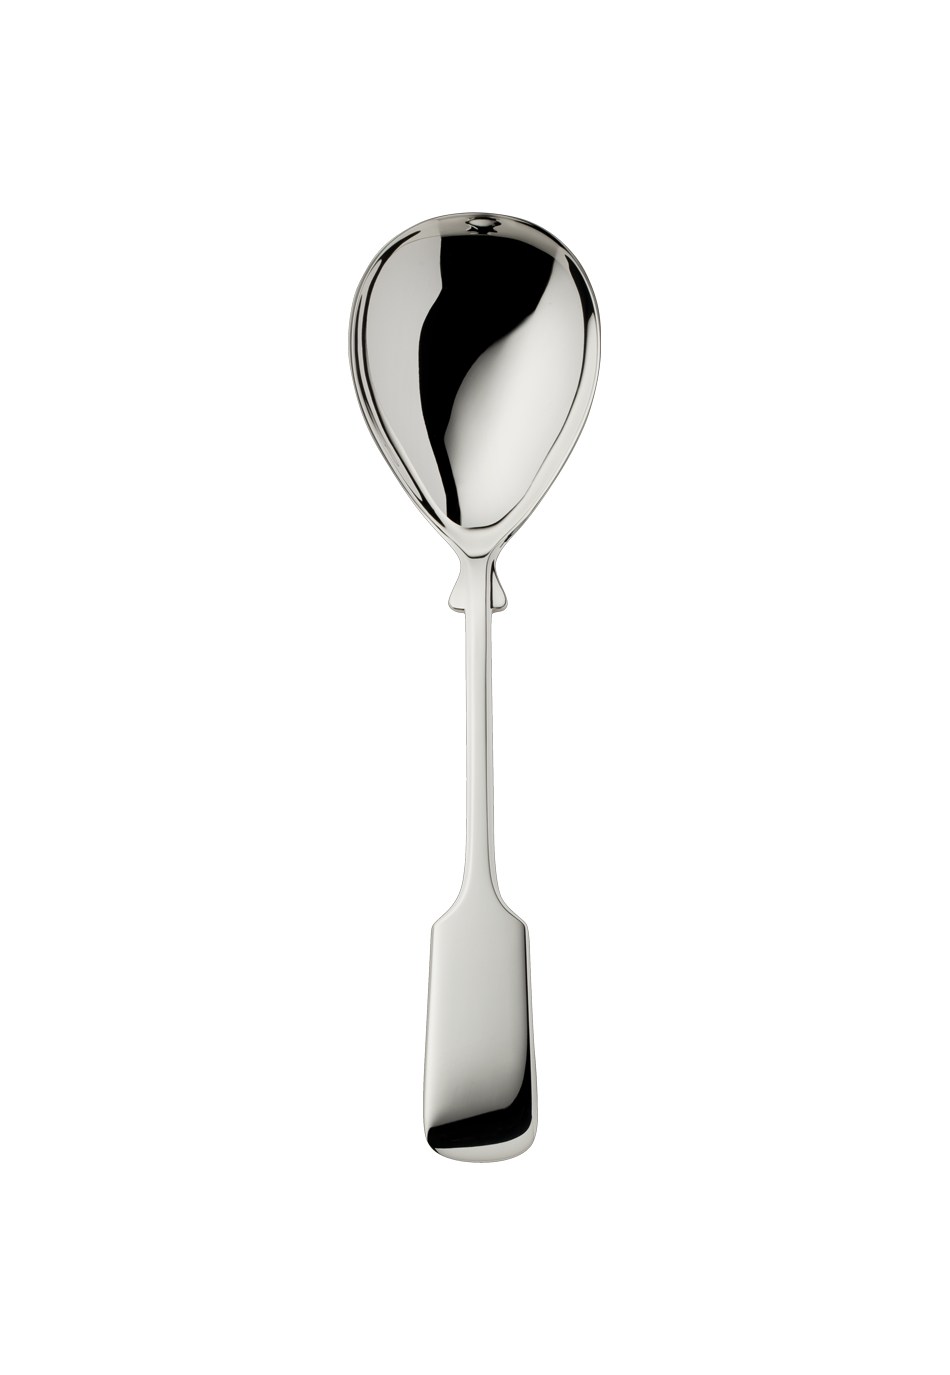 Alt-Spaten Compote/Salad Serving Spoon, large (150g massive silverplated)